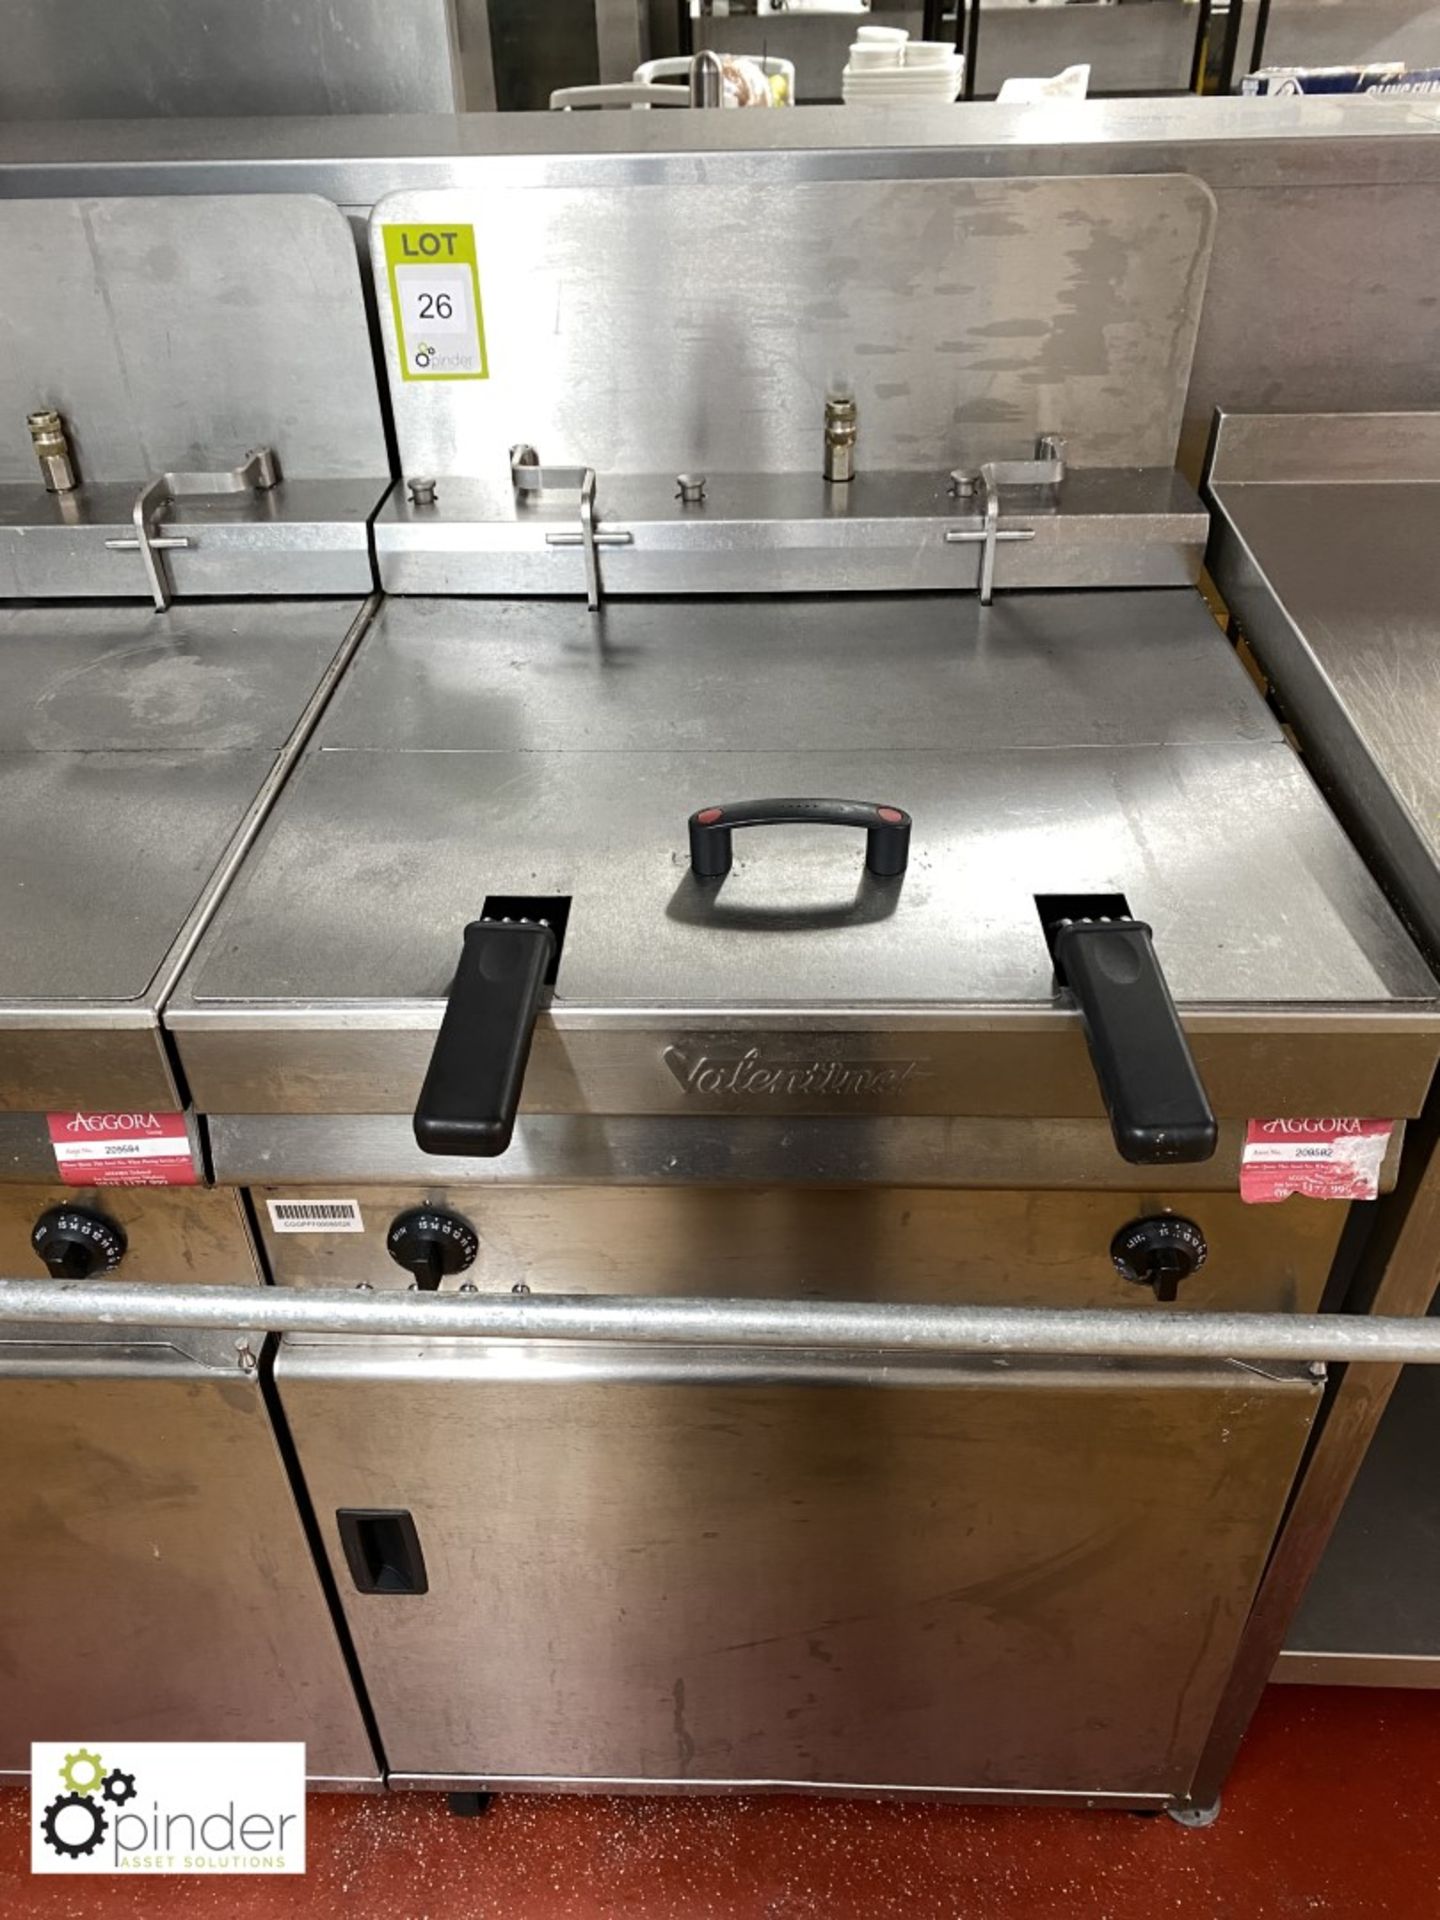 Valentine mobile electric twin basket Deep Fat Fryer (located in Main Kitchen)